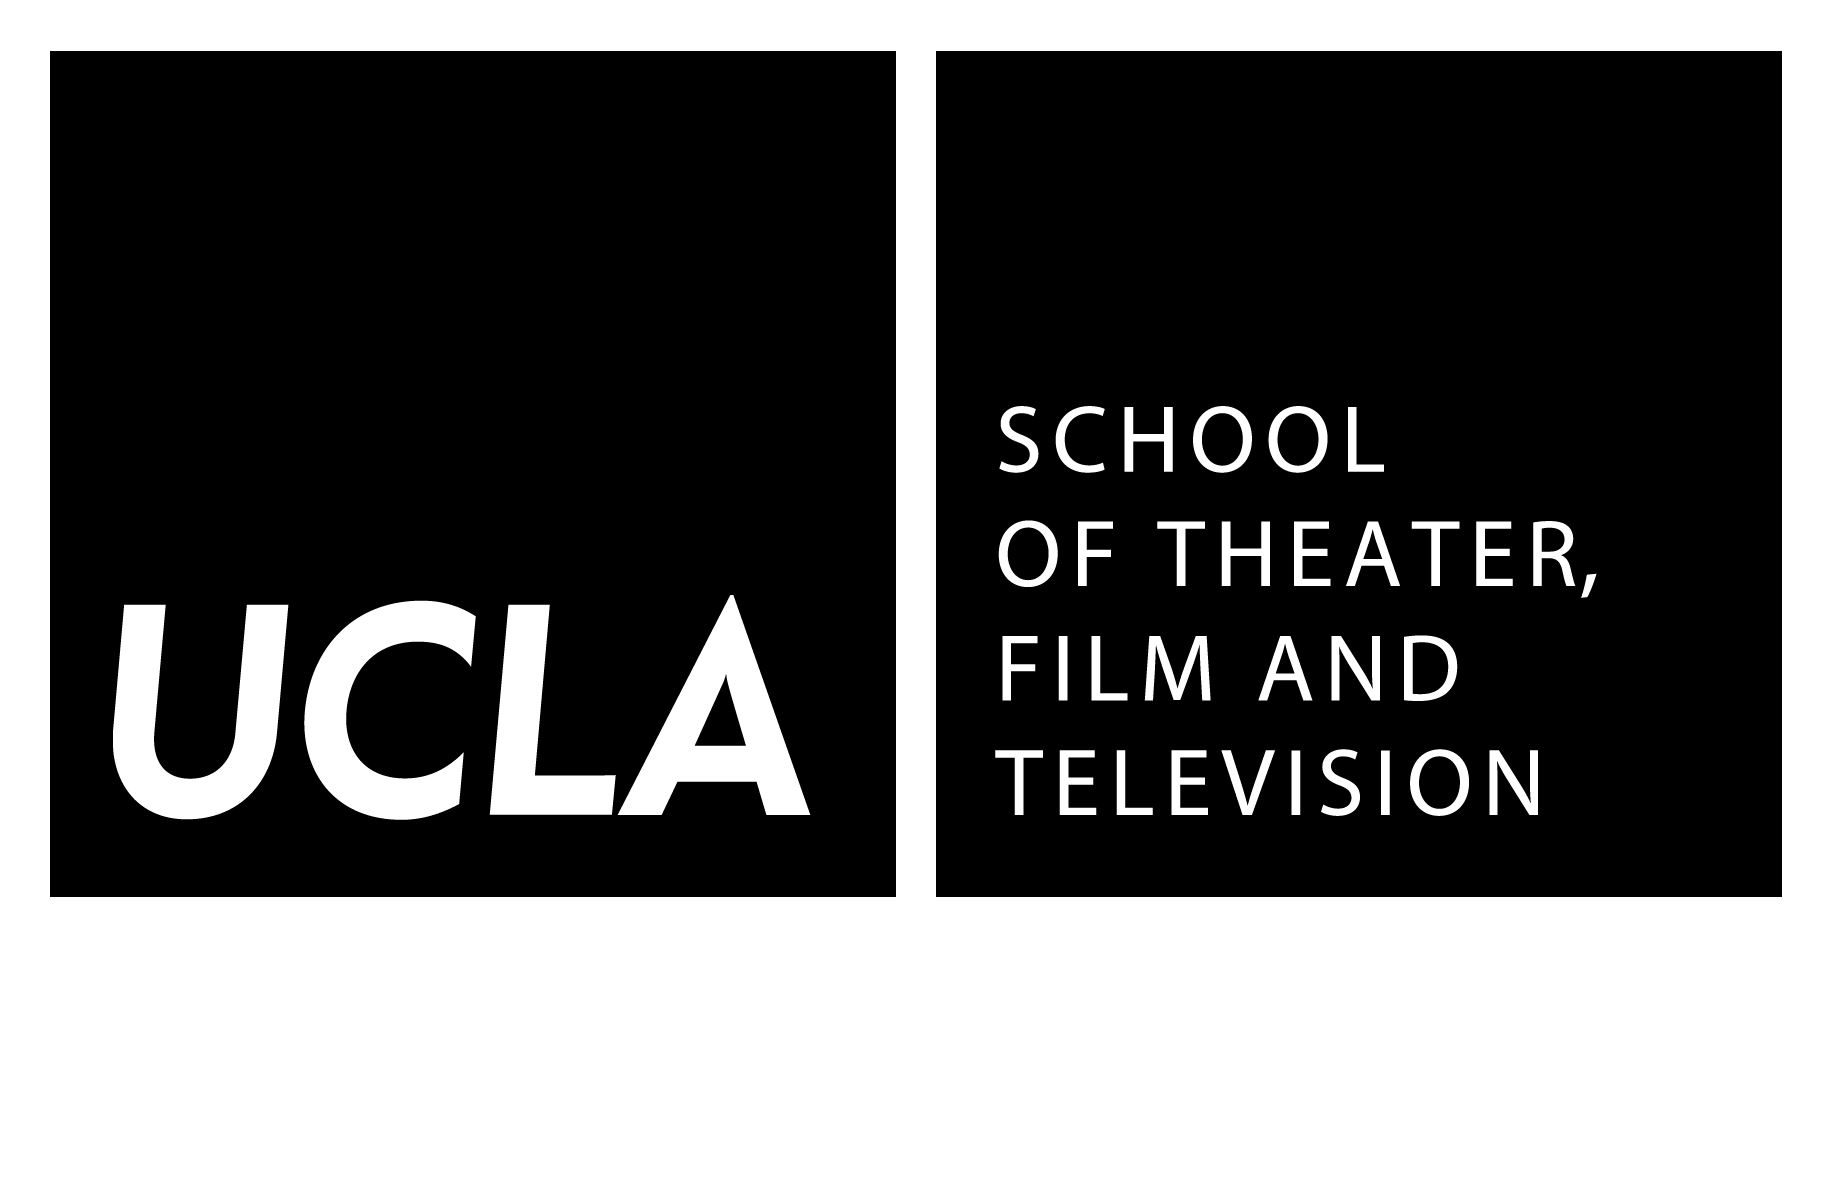 THEATER Tour for Prospective Students - Mar 2